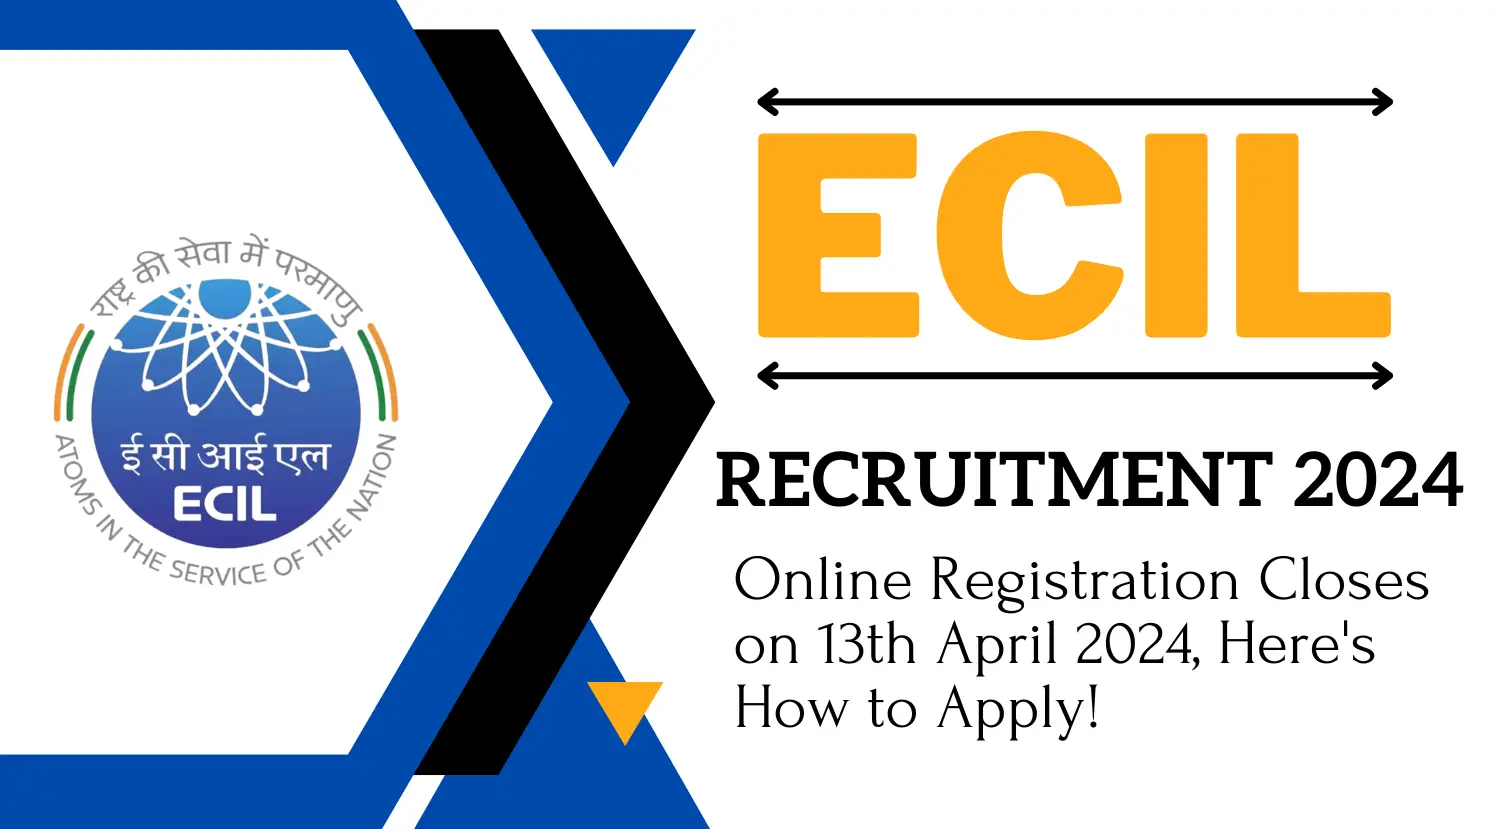 ECIL Recruitment Online Registration Closes on 13th April 2024 Heres How to Apply